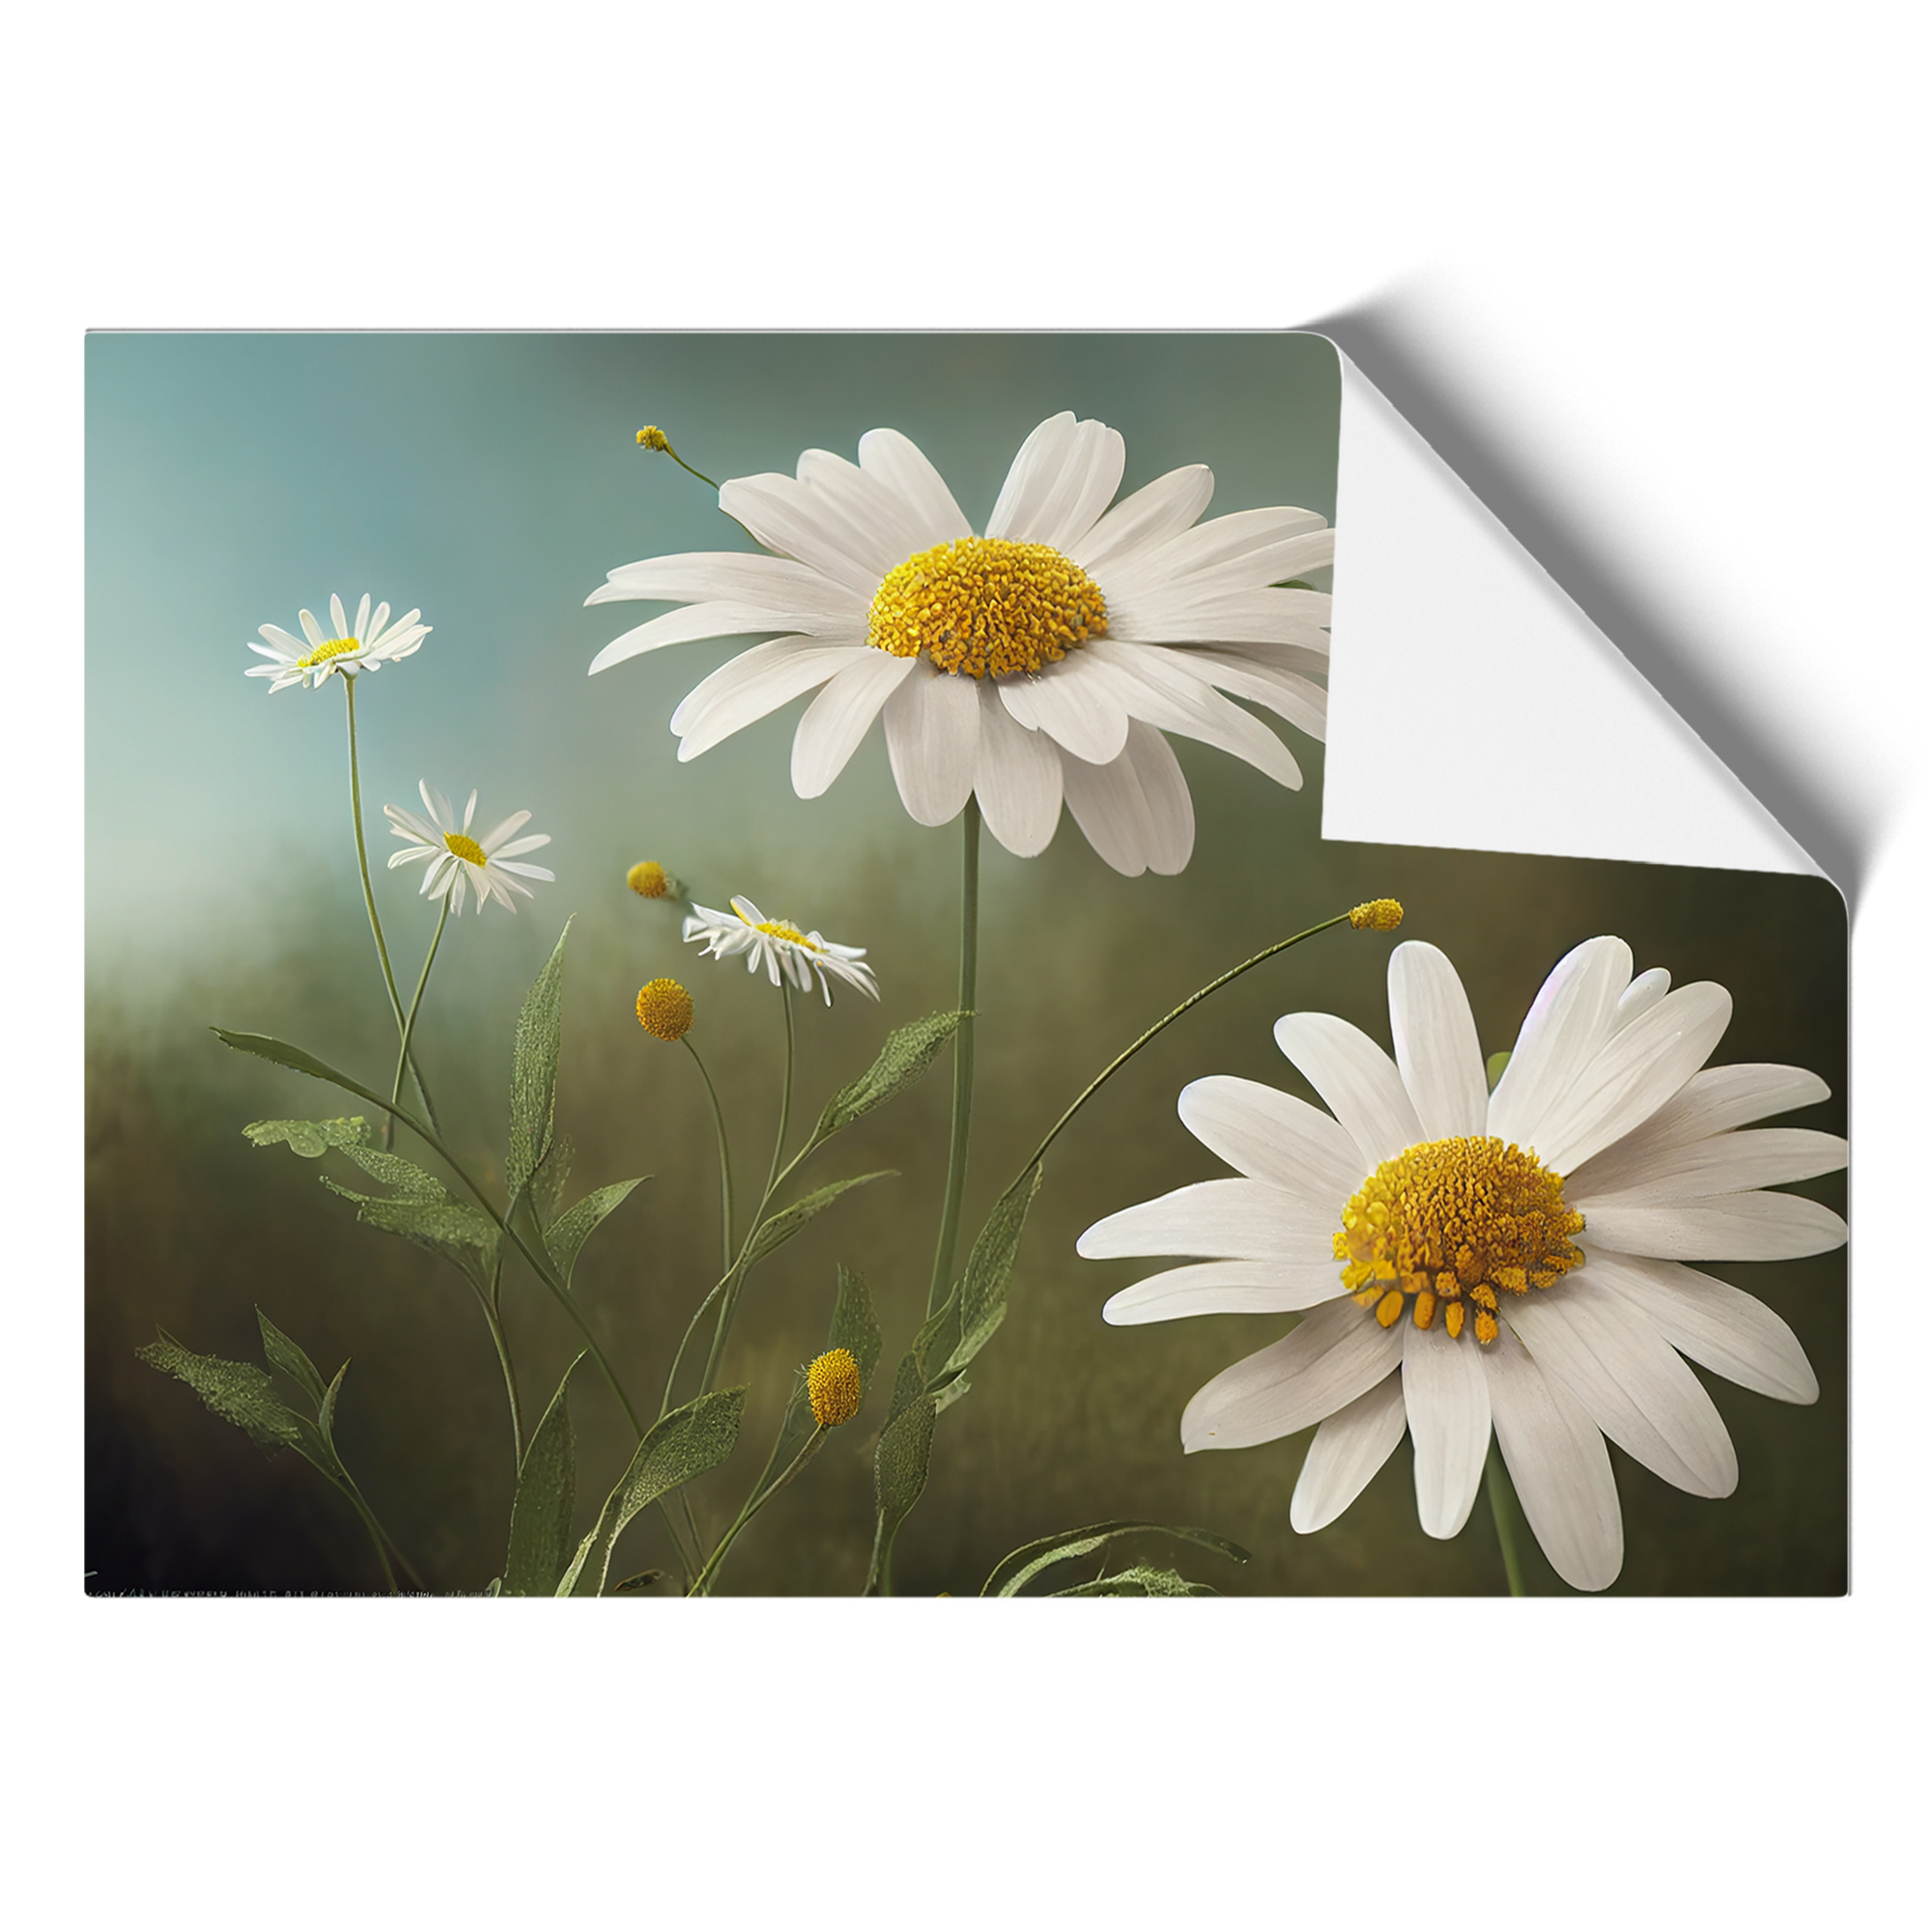 Artsy Daisy Flowers Framed Wall Art Poster Print Home Decor Picture Large |  eBay